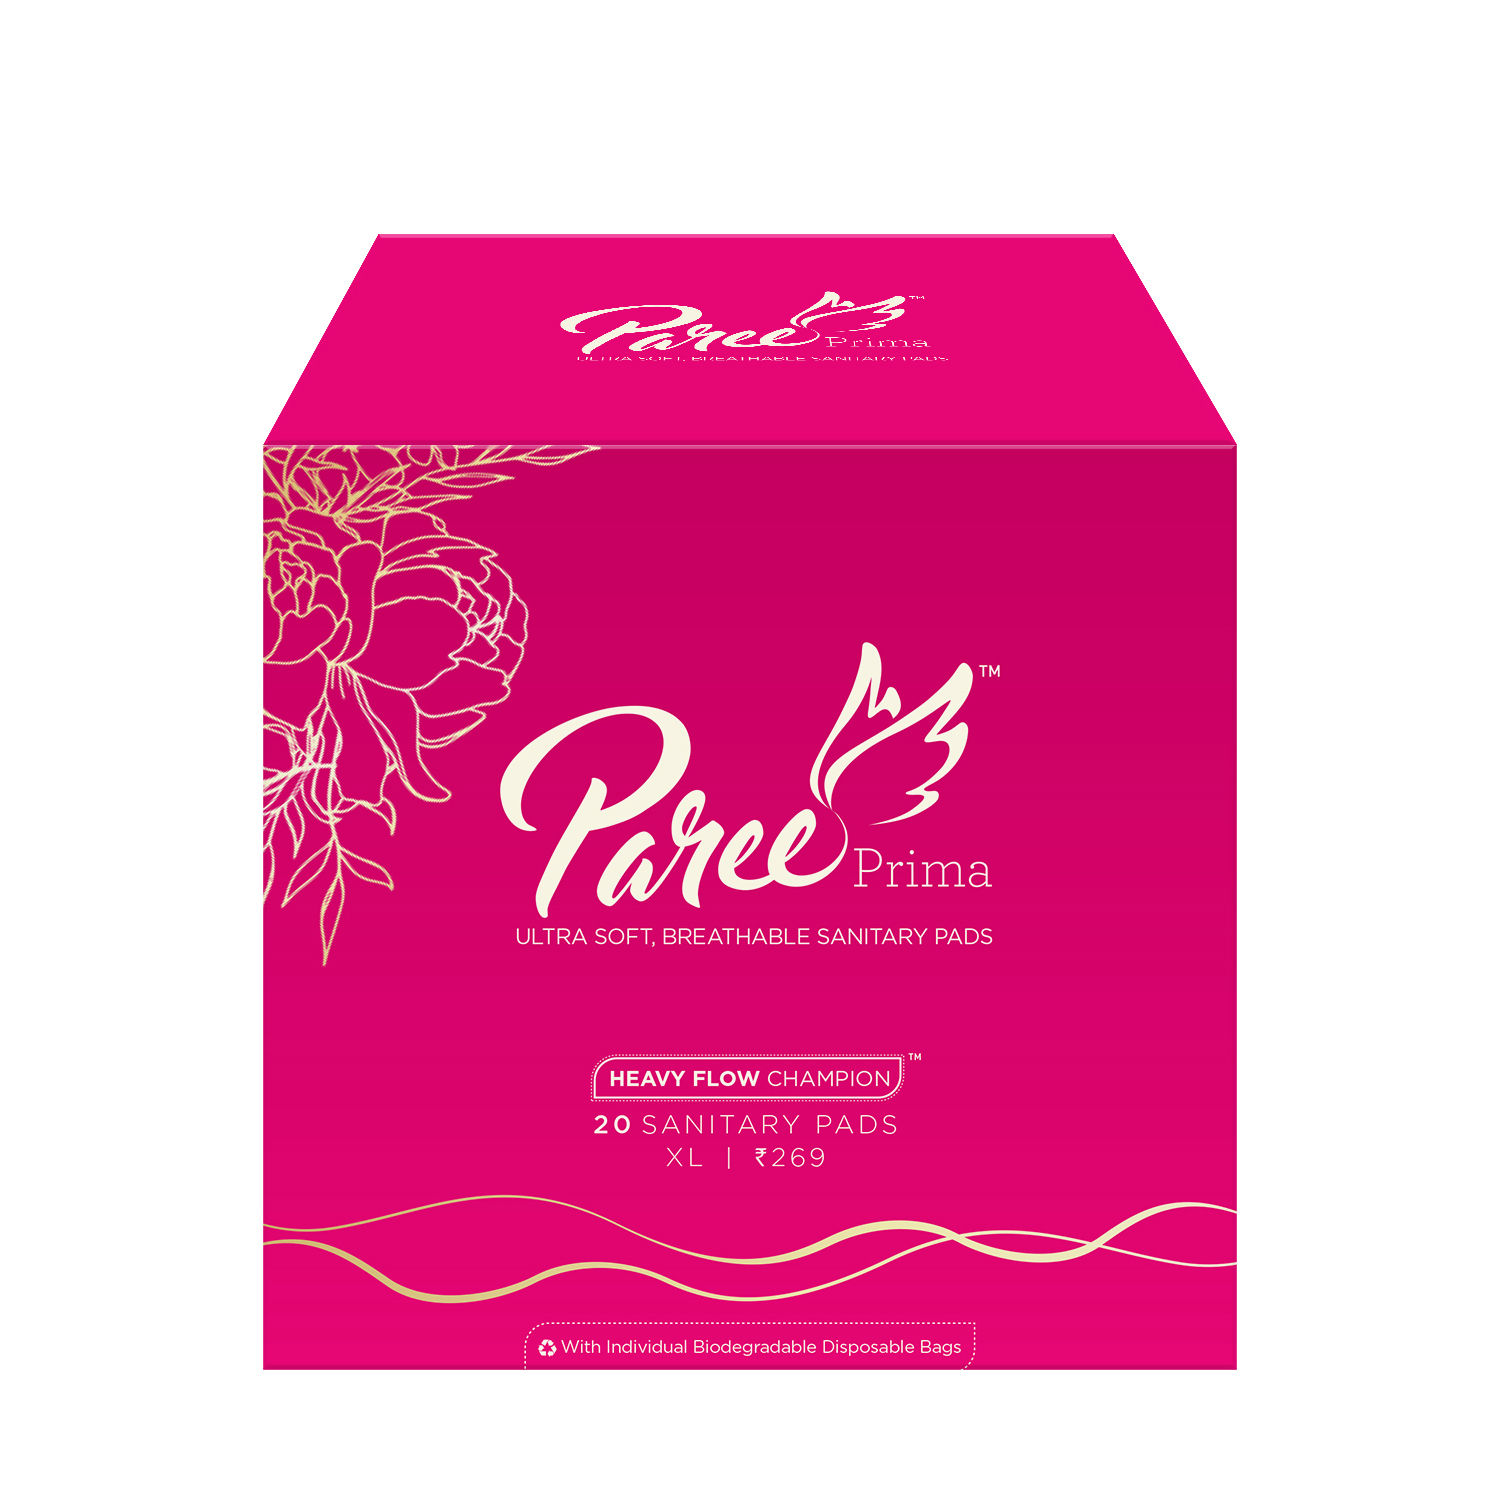 Buy Paree Prima Premium Ultra Soft Sanitary Pads for Women with Breathable Back Sheet And Super Soft Top Sheet for Heavy Flow, XL| Biodegradable Disposable Bags, 20 Pads - Purplle